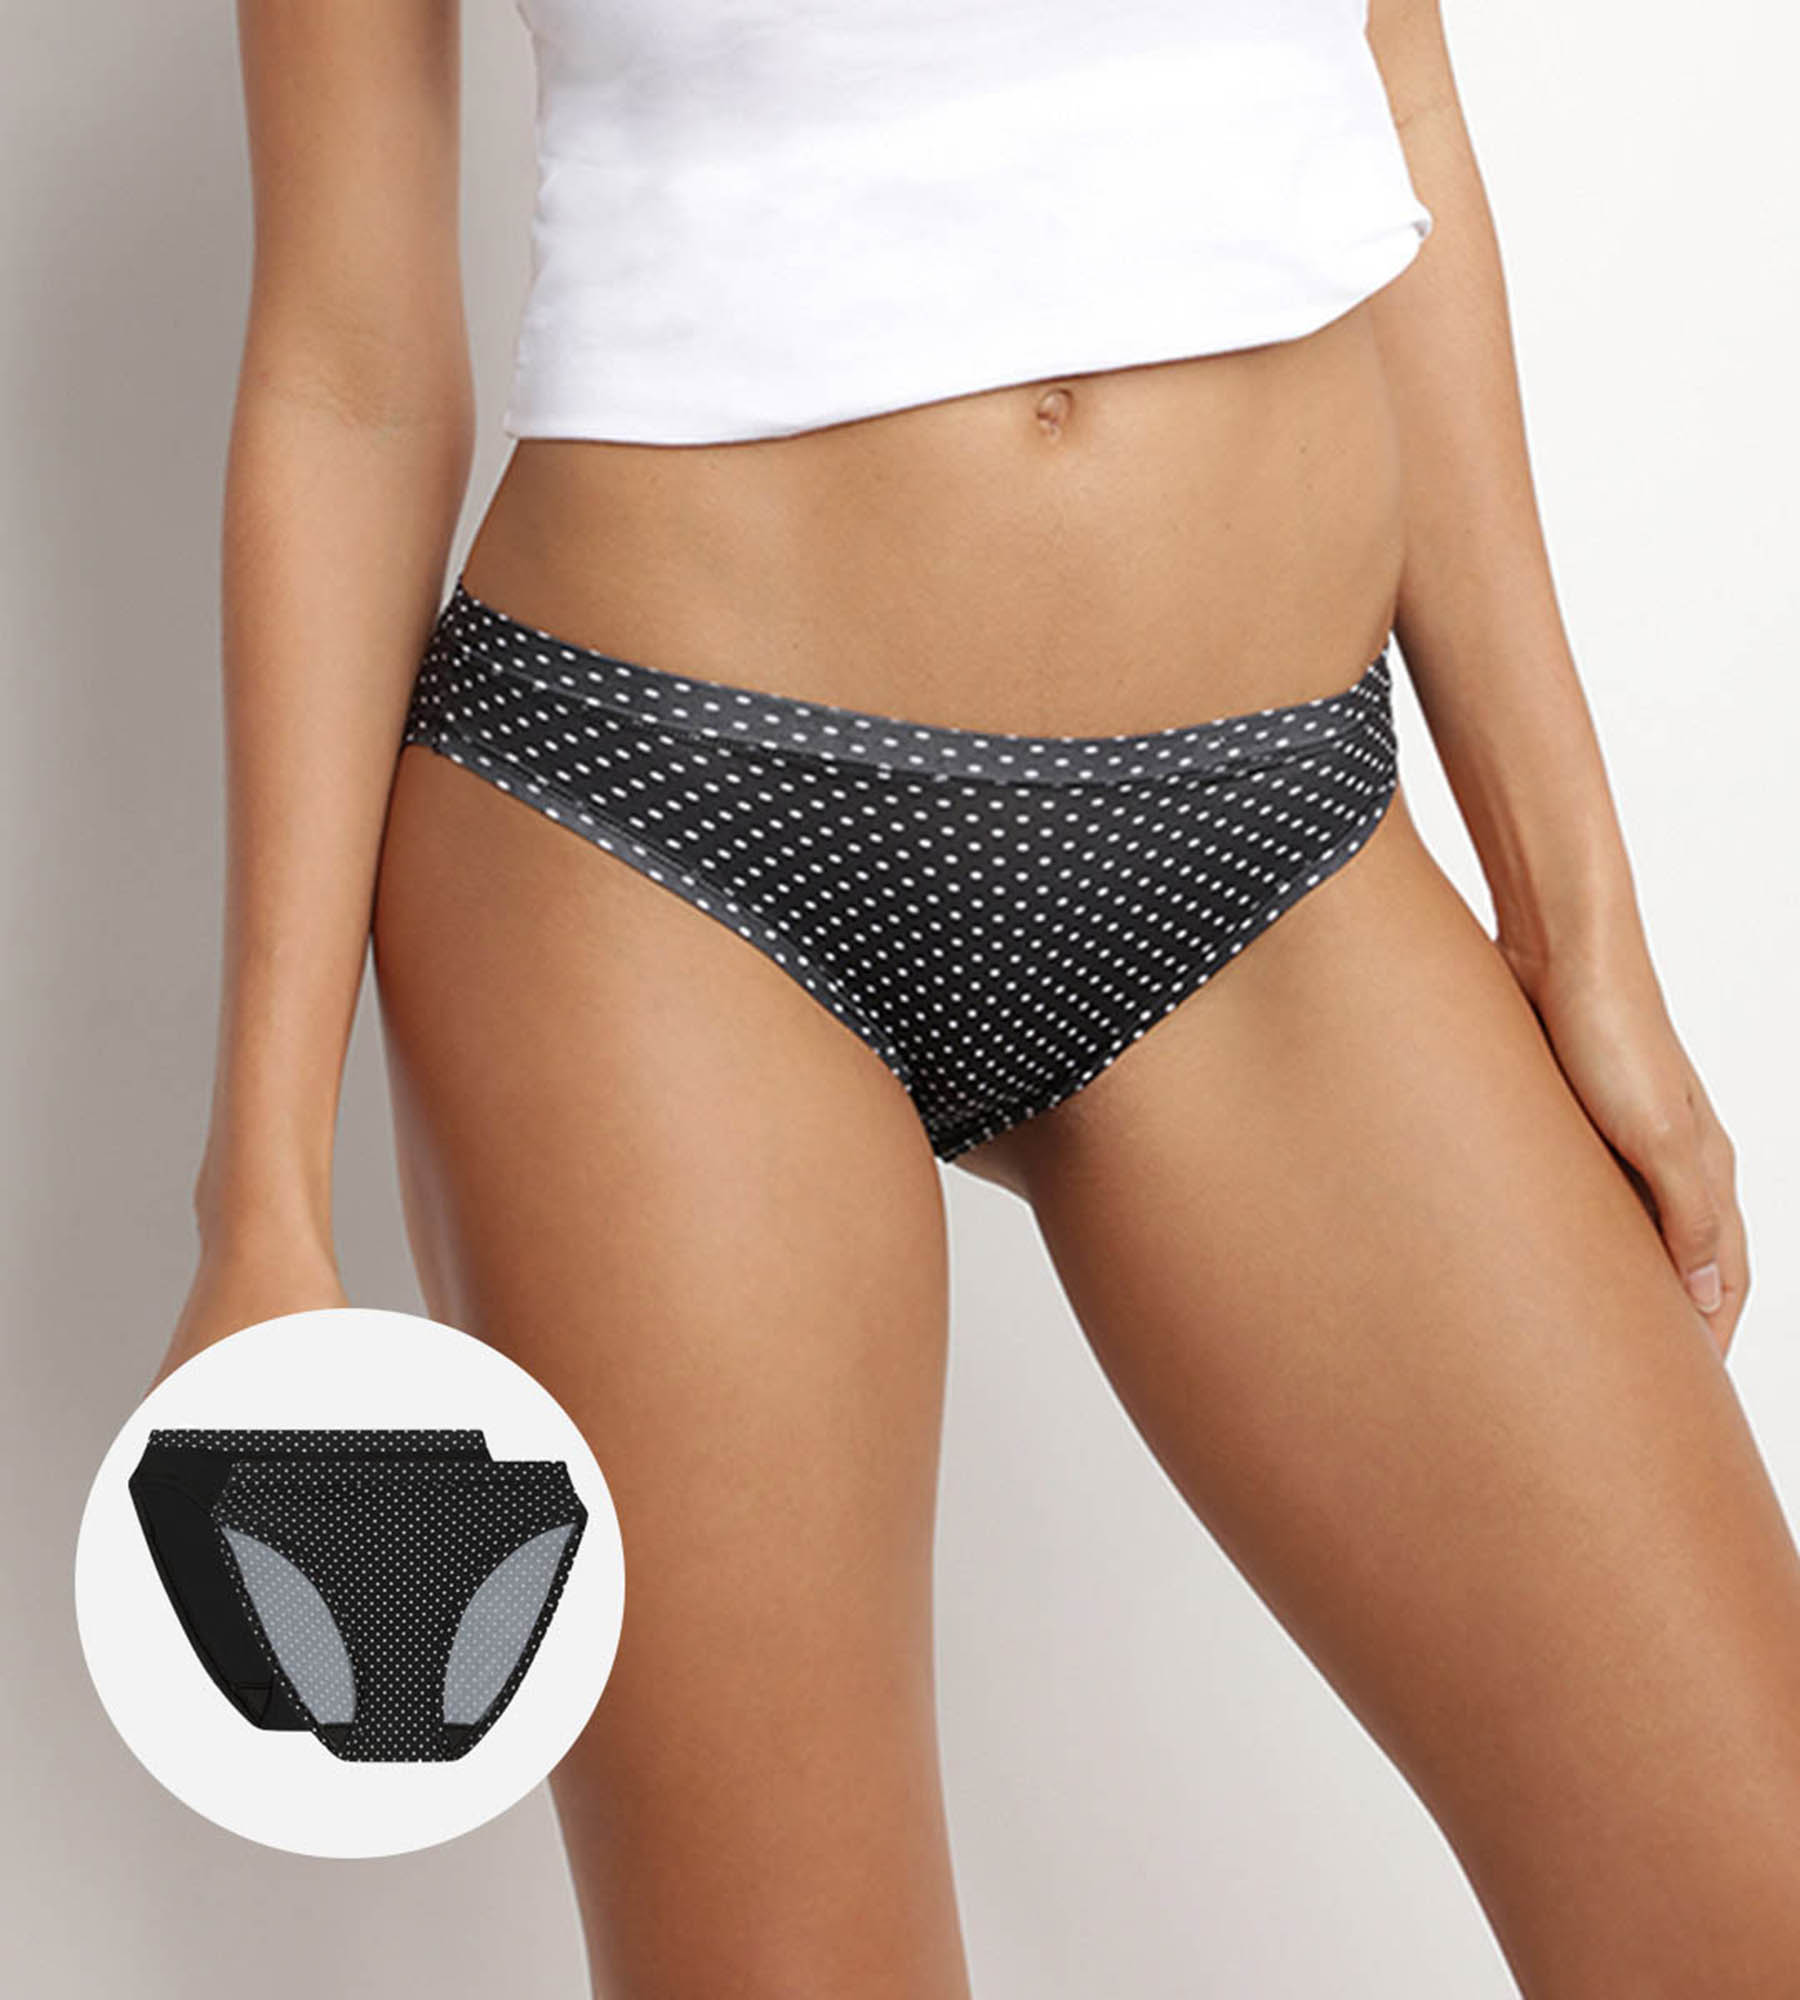 Pack of 3 pairs of Les Pockets Coton bikini knickers in black